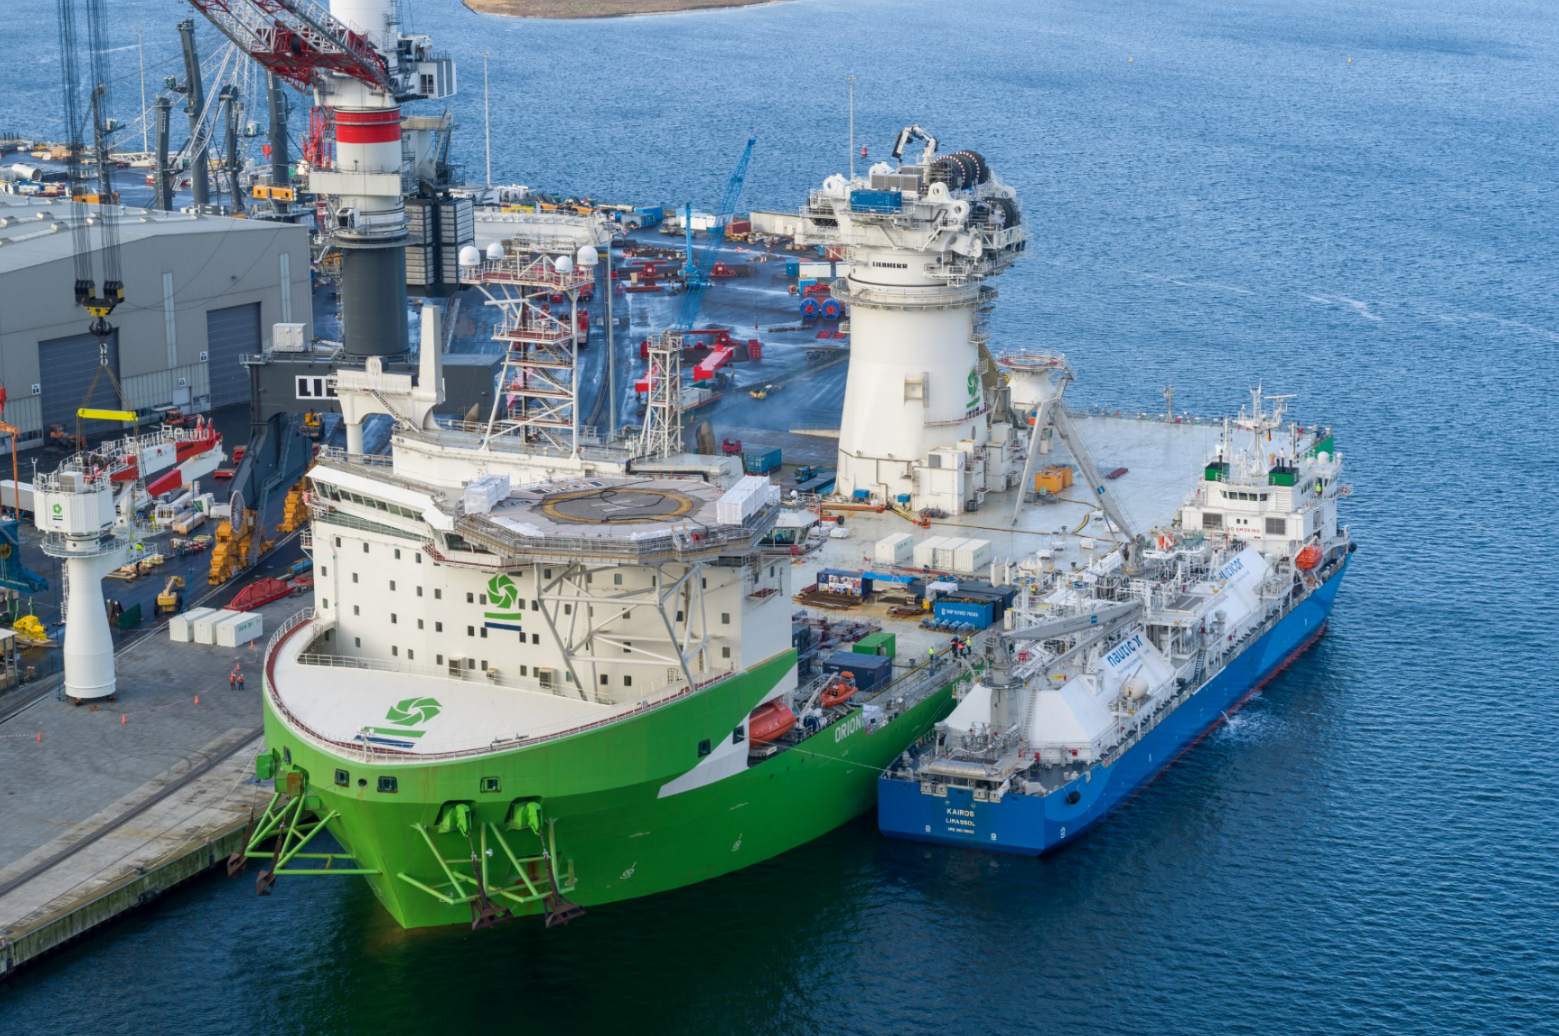 Next generation offshore installation vessel ‘Orion’ fuelled for the first time with LNG